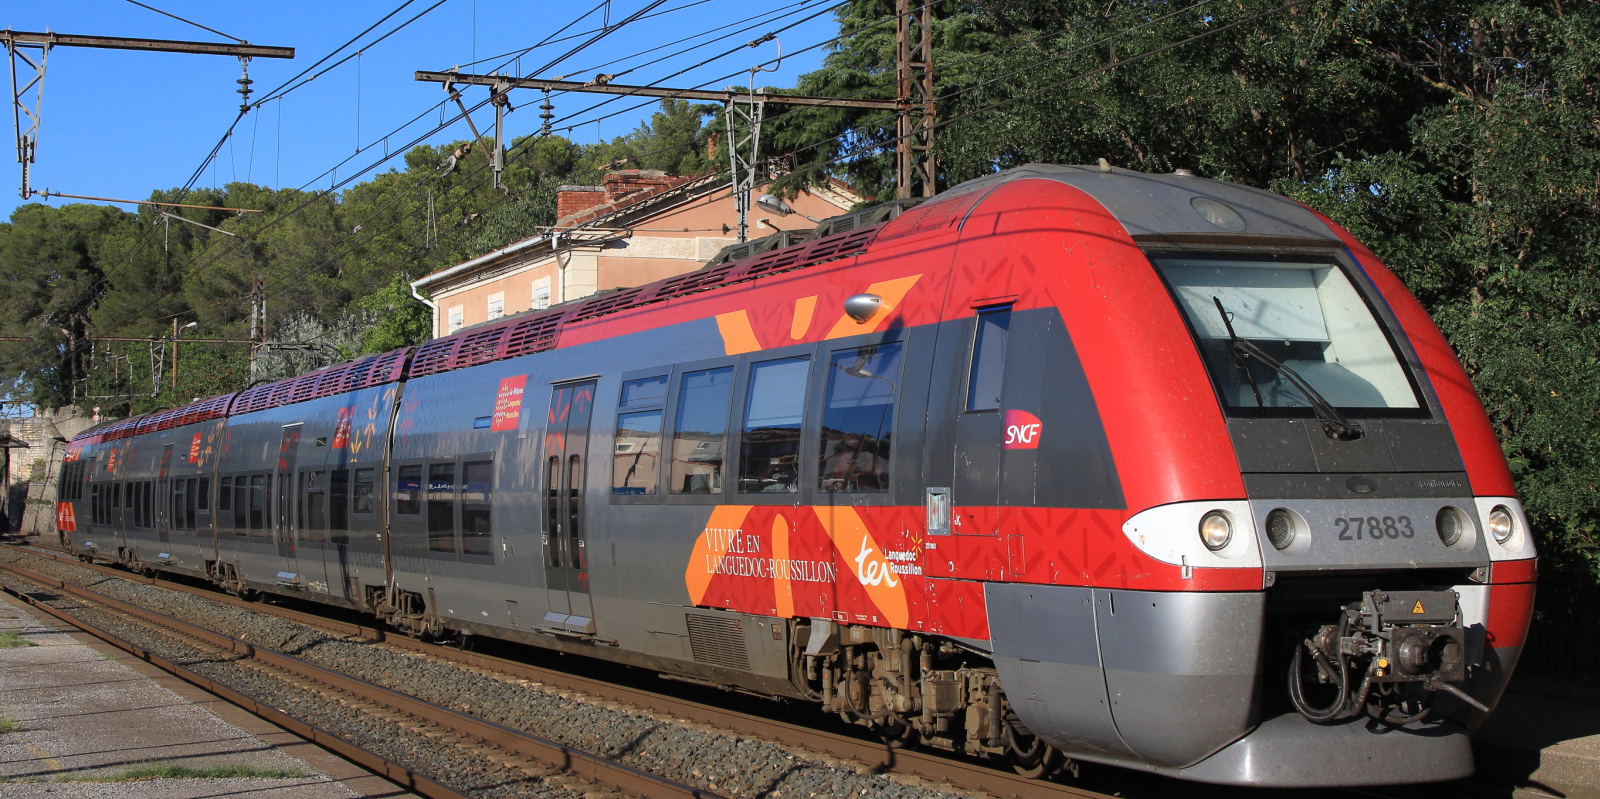 Z 27883 of the TER Languedoc-Roussillon in July 2013 in Milhaud